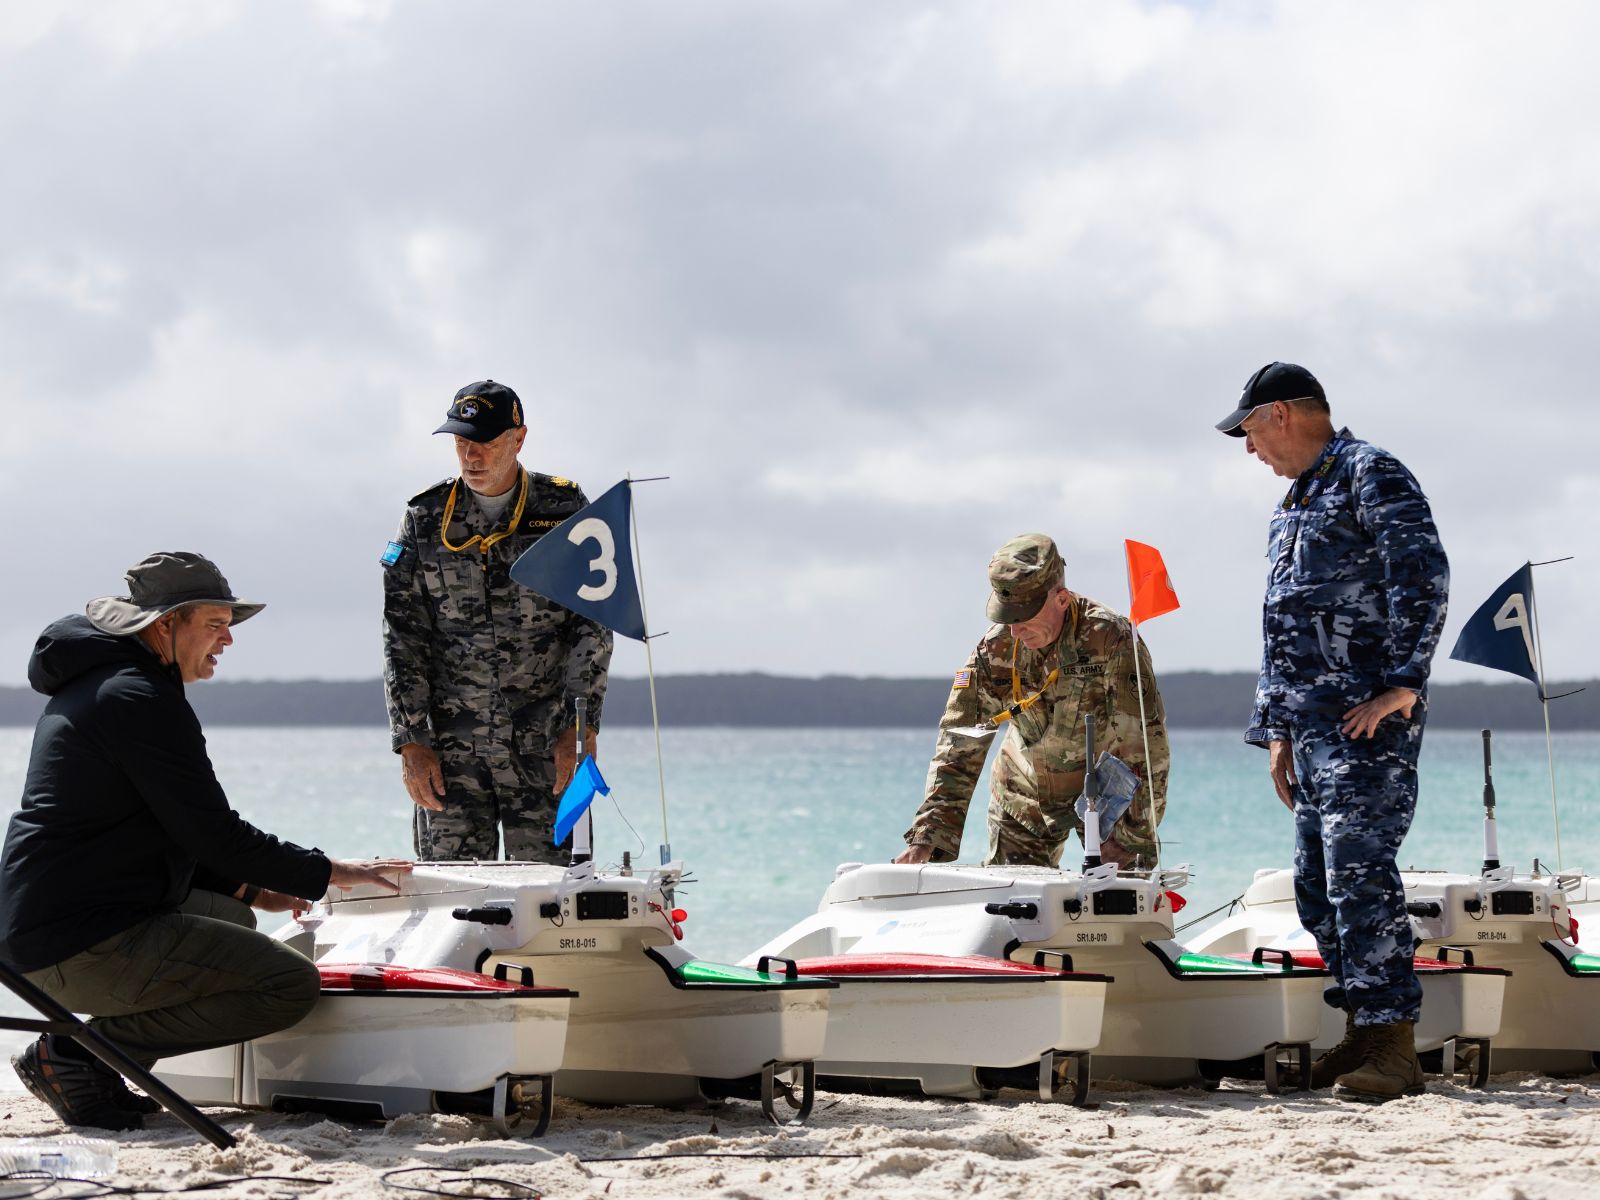 A Defence scientist and ADF members work together on uncrewed systems during the Technical Cooperation Program AI Strategic Challenge 2023 at HMAS Creswell, Jervis Bay Territory.